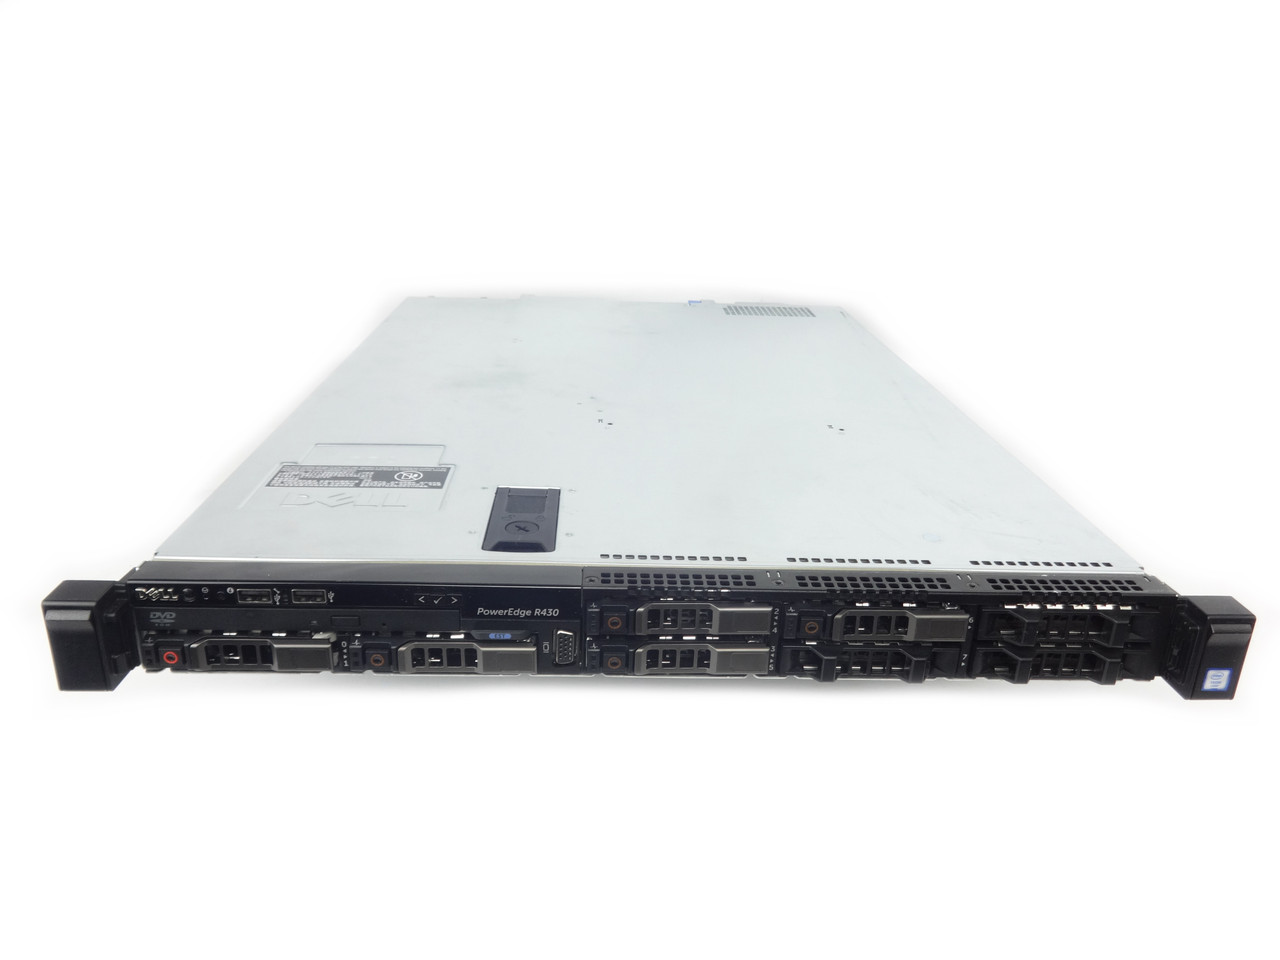 Dell Poweredge R430 8x 2.5" Server Build to Order